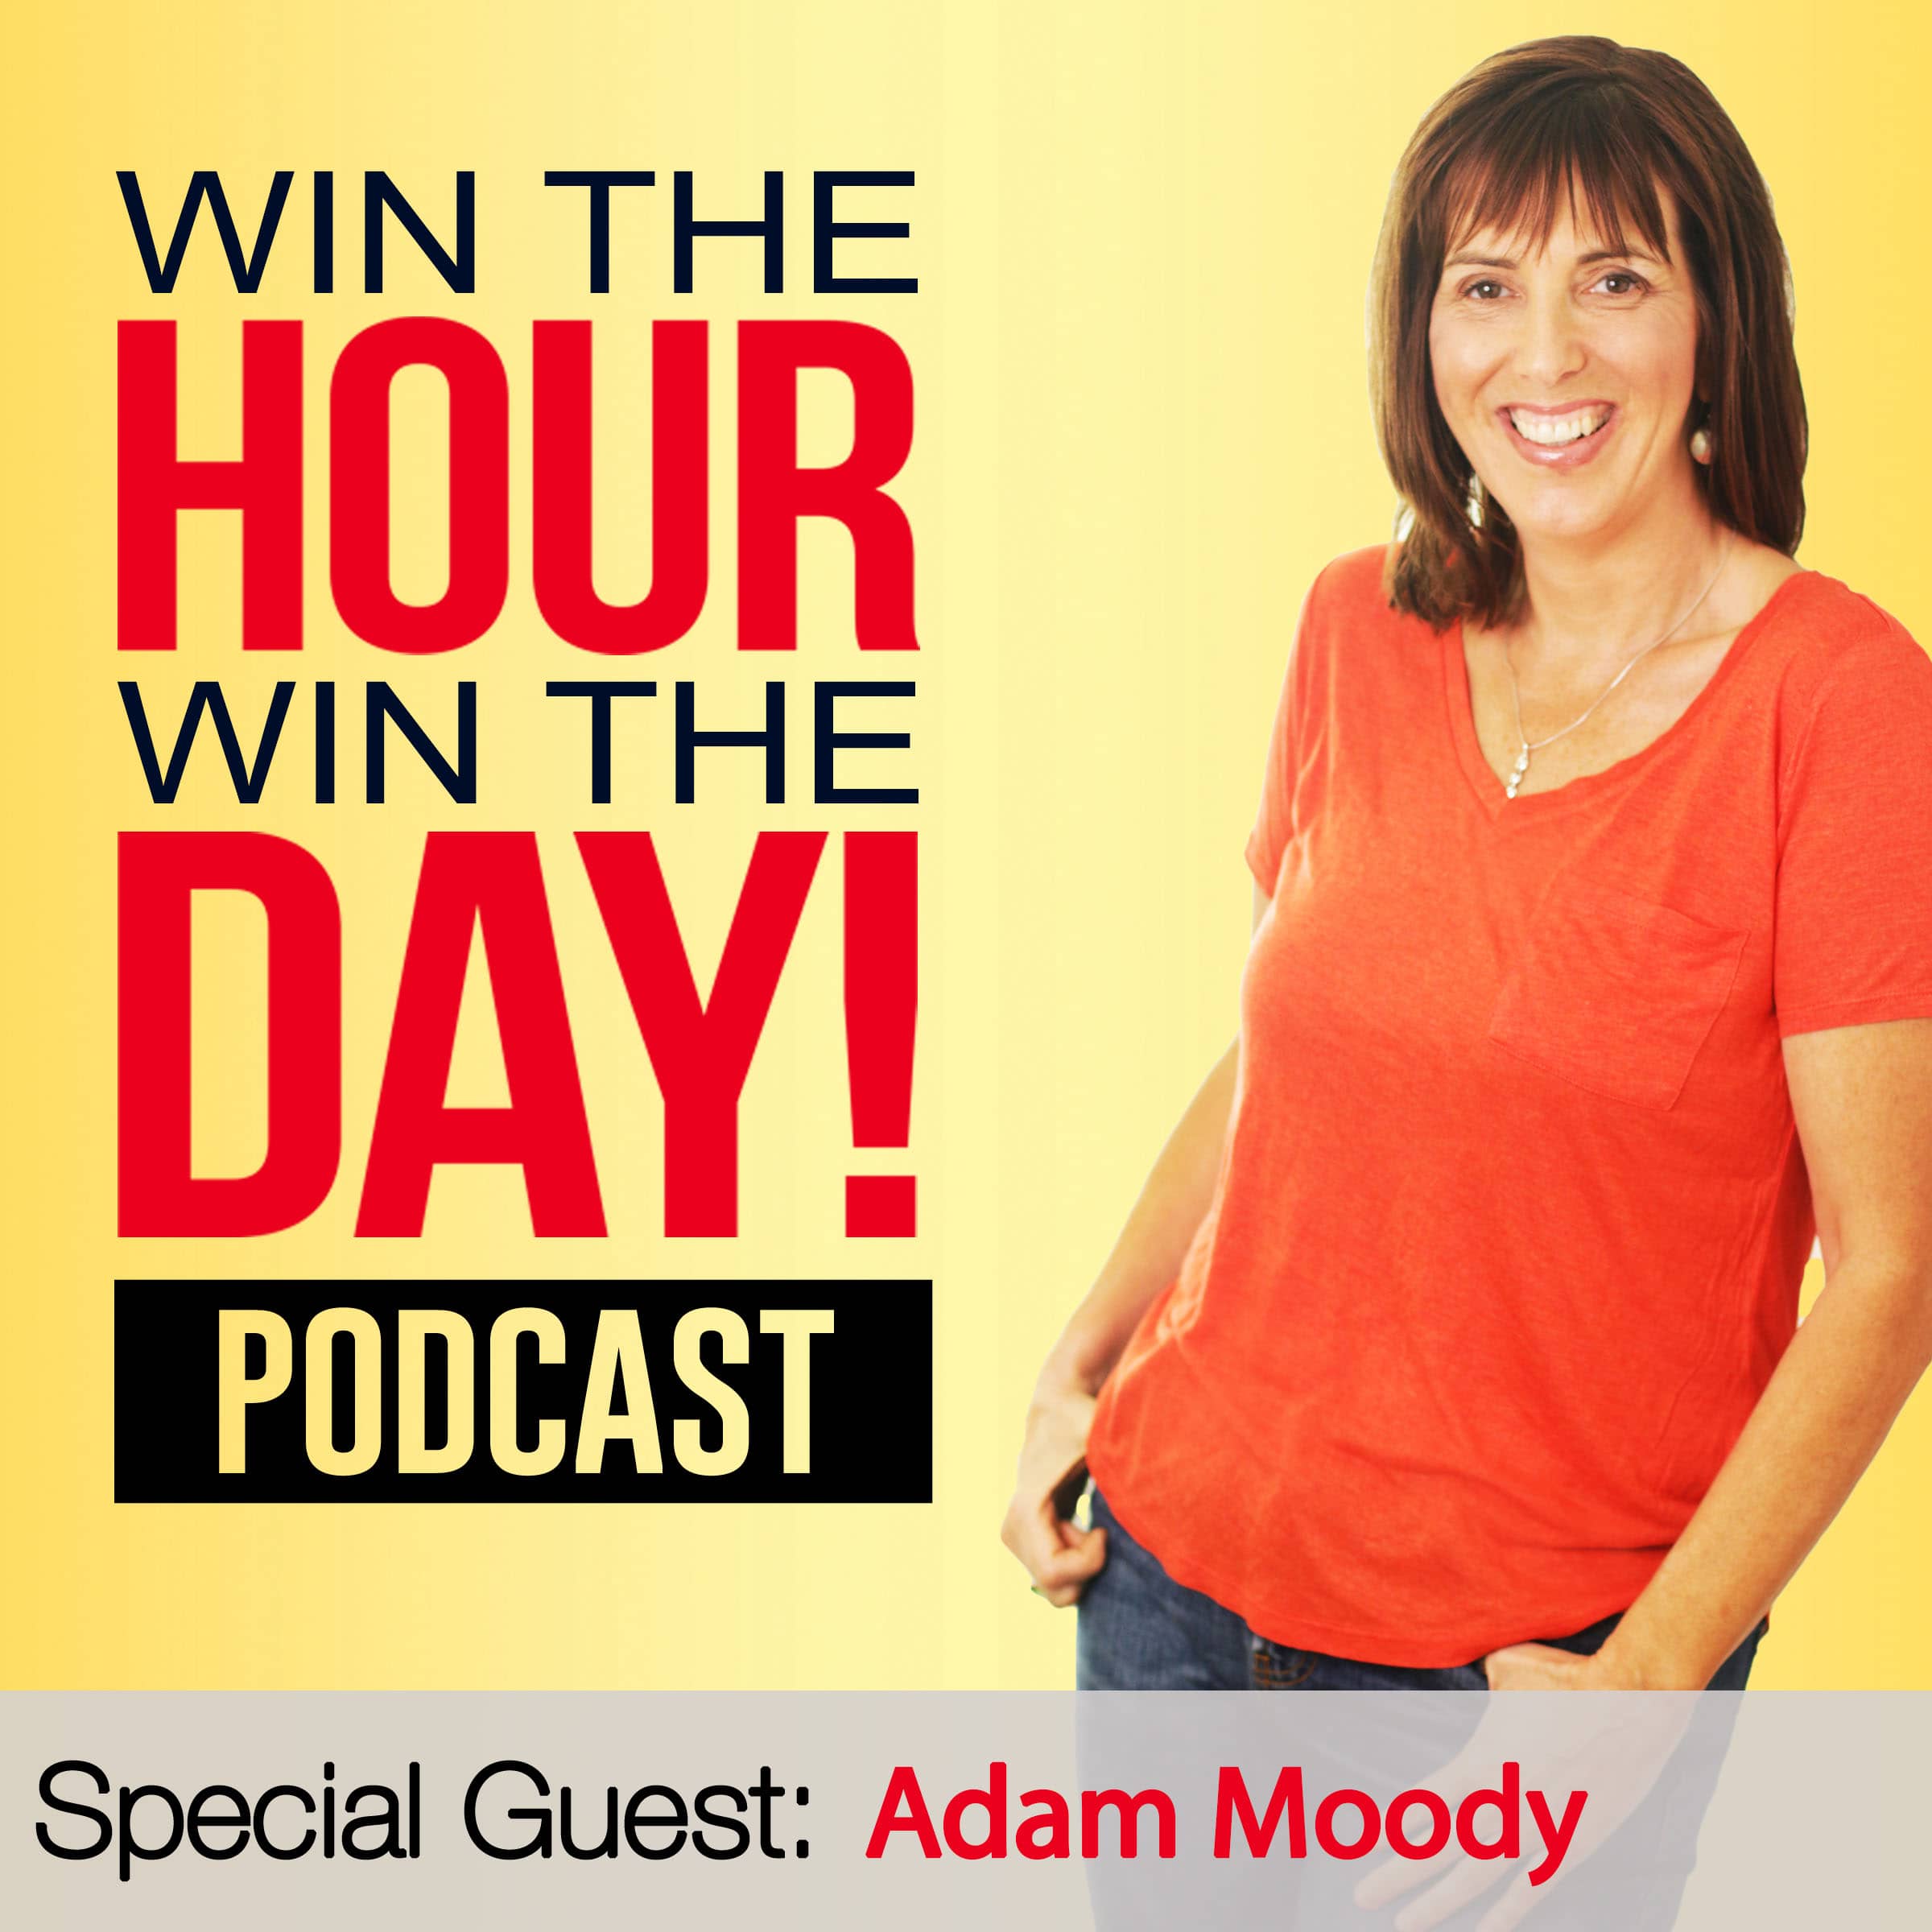 How To Get Sales Out Of An Email! With Adam Moody